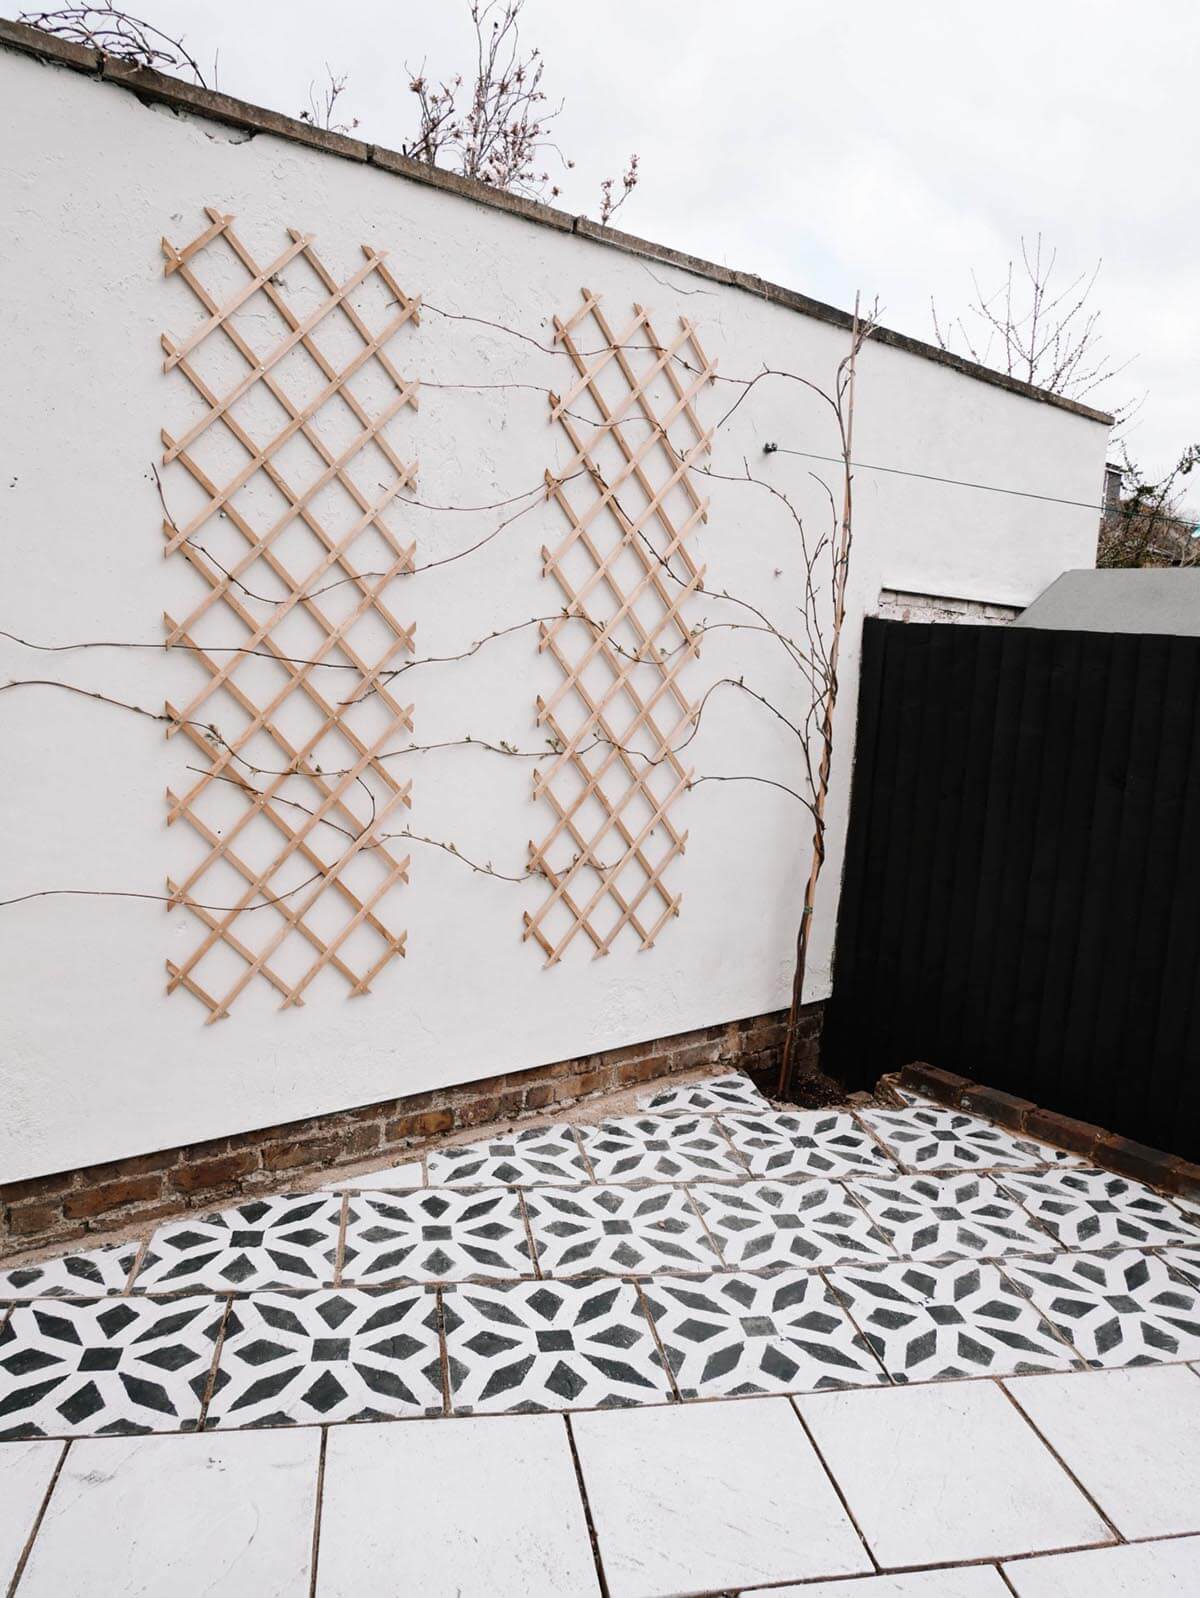 Stenciled Geometric Flowered Black and White Outdoor Tile